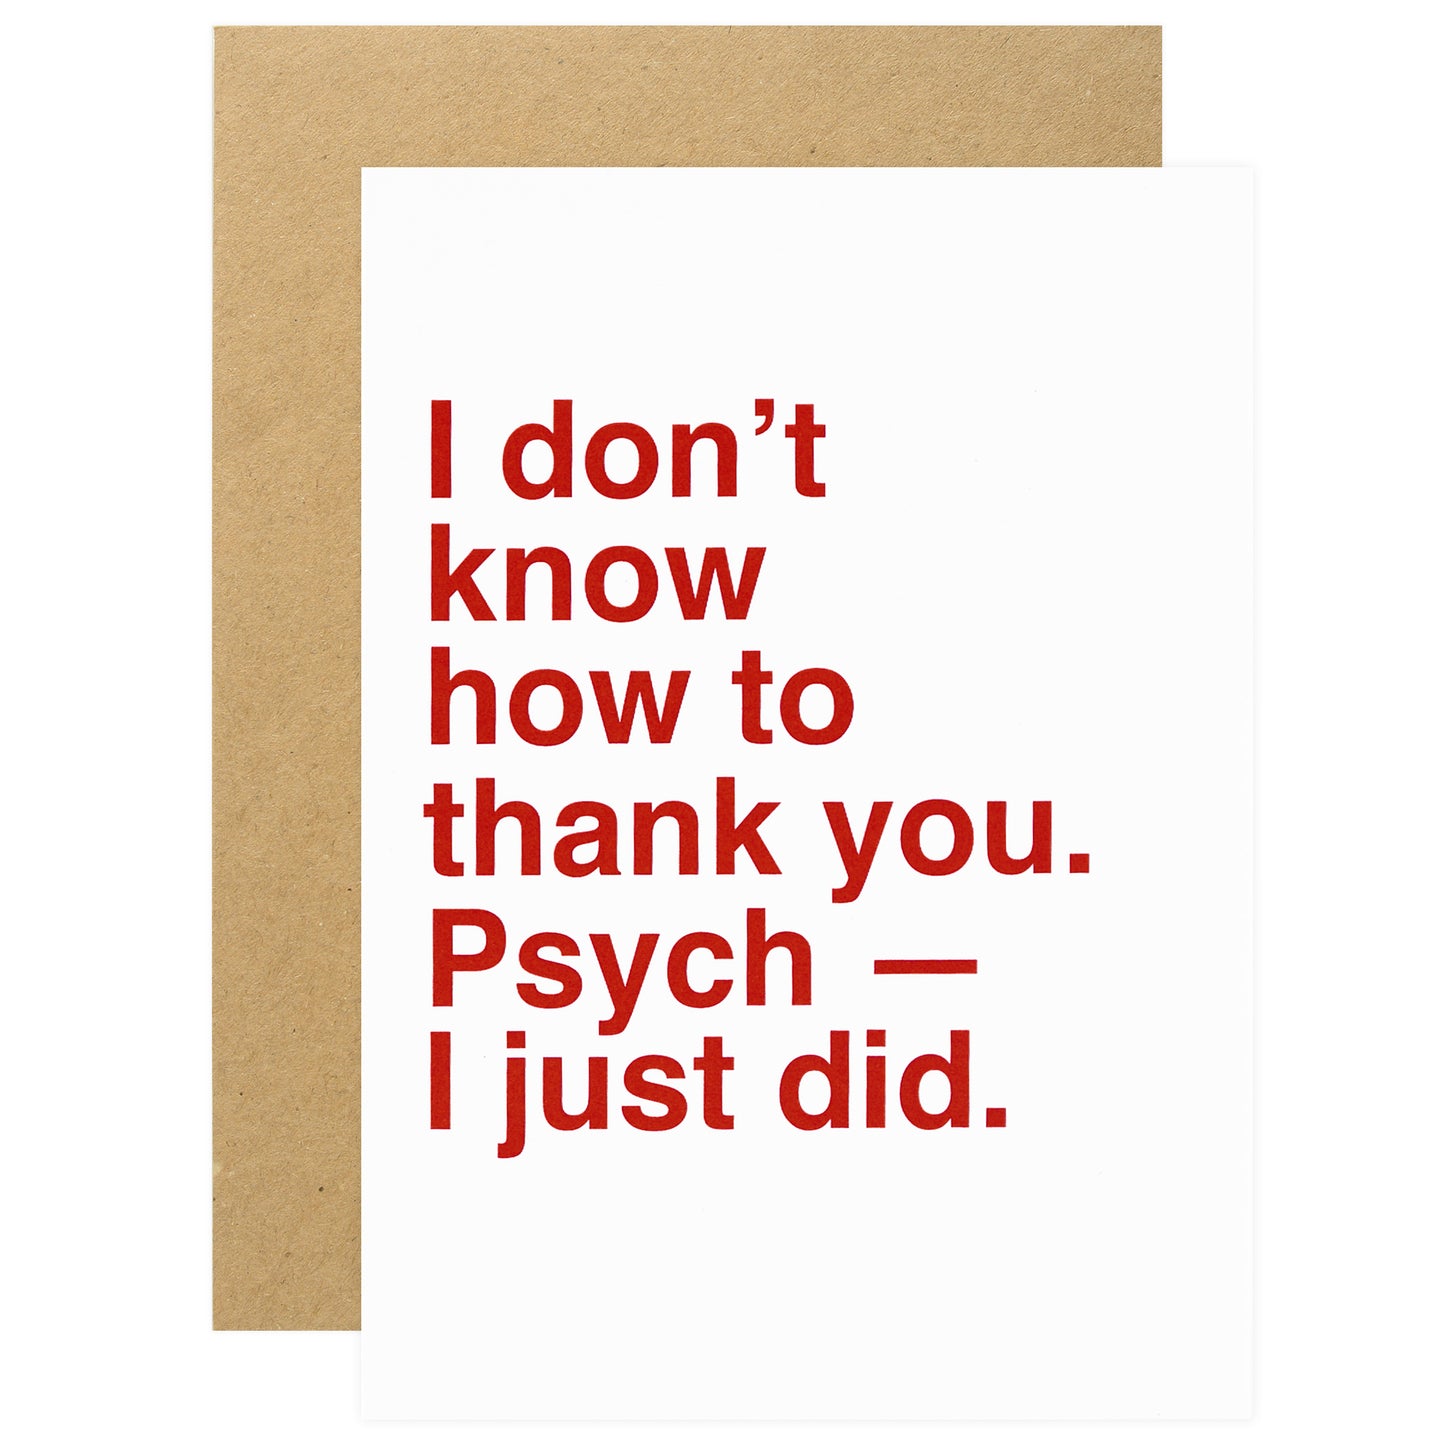 Sad Shop I Don't Know How to Thank You. Psych - I Just Did Greeting Card 